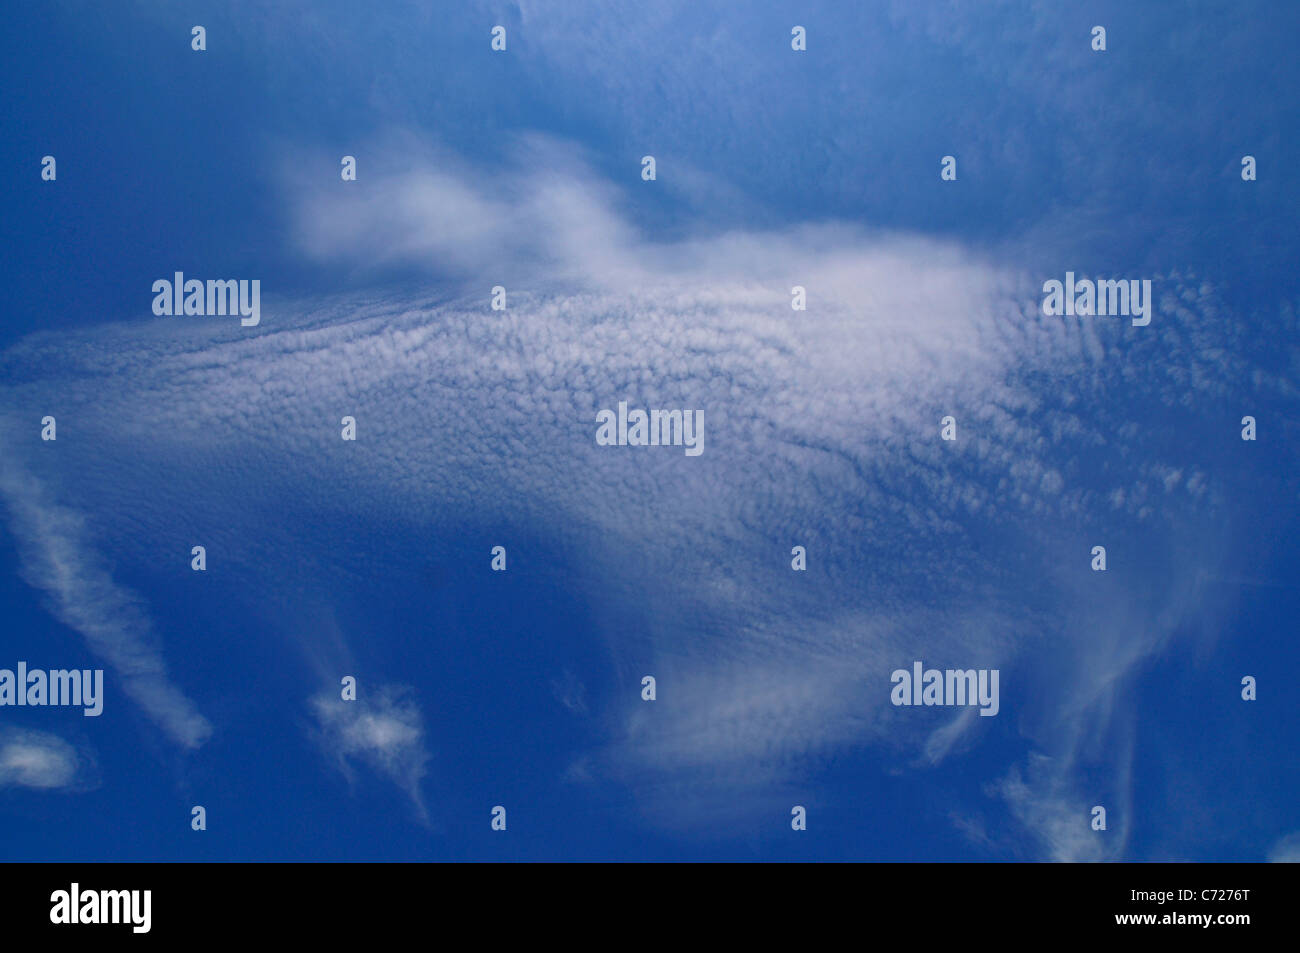 Mackerel cloud formation in the sky. Stock Photo